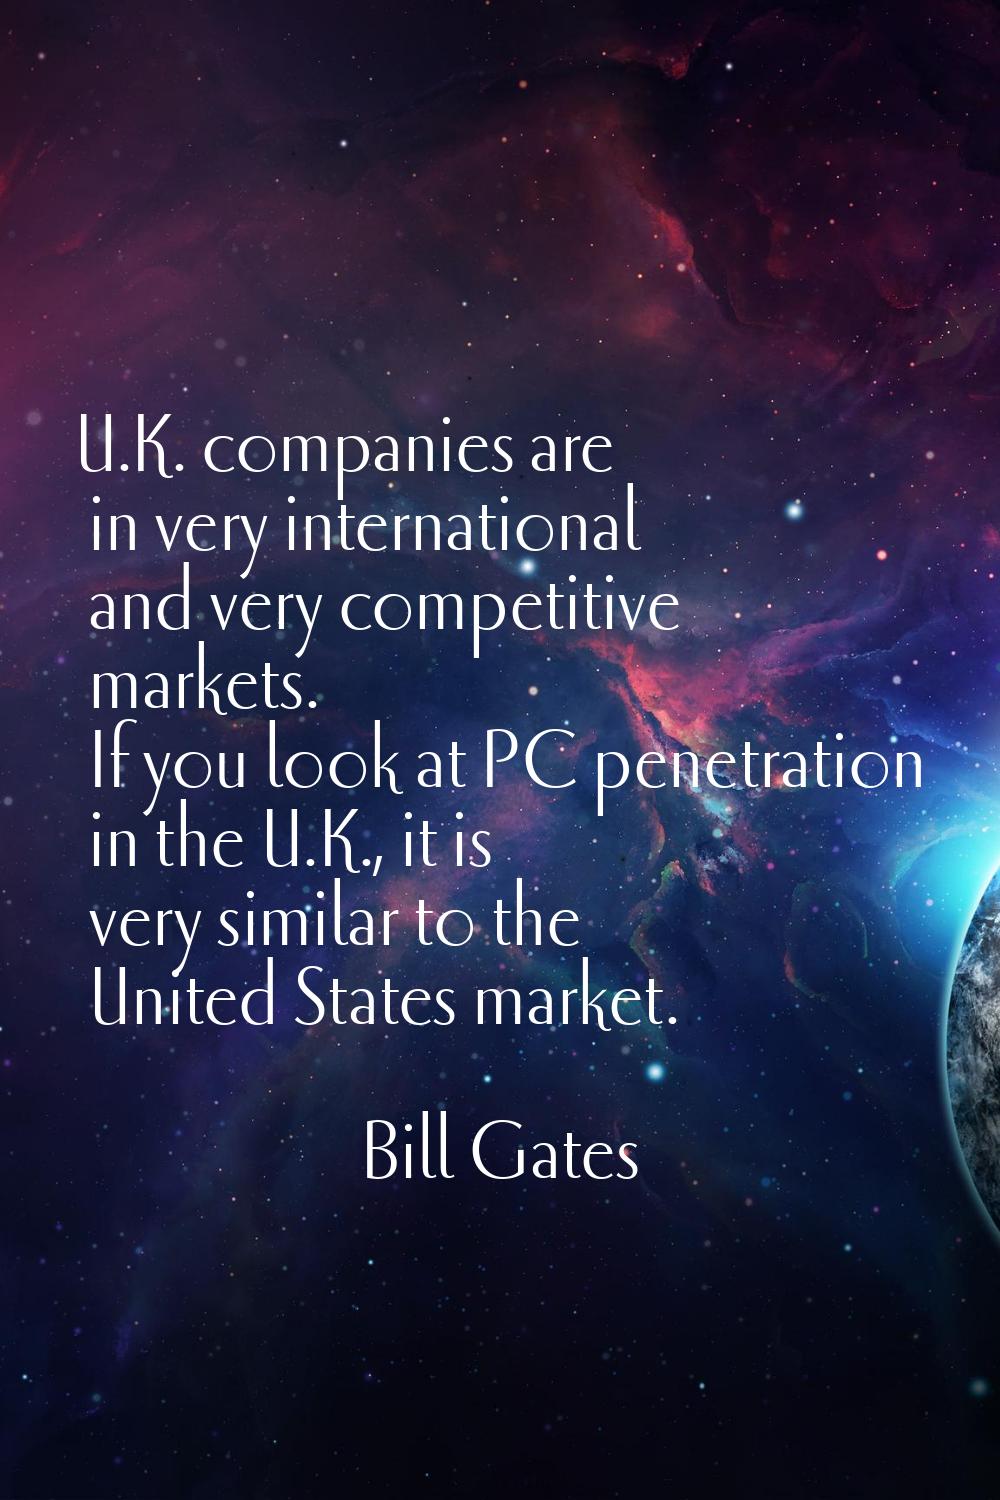 U.K. companies are in very international and very competitive markets. If you look at PC penetratio